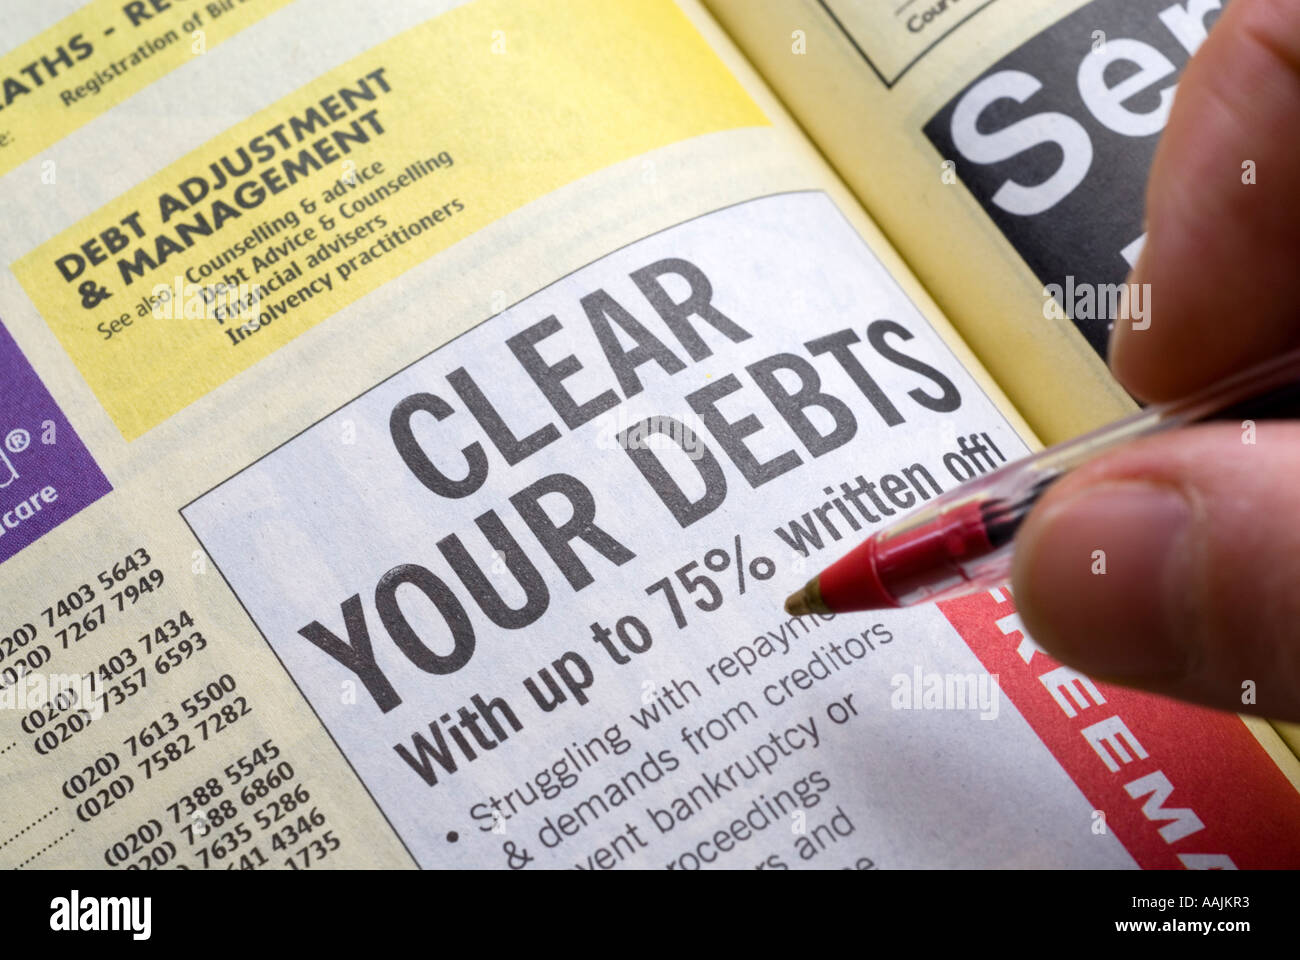 Clear Your Debts advertisement in Yellow Pages England UK Stock Photo